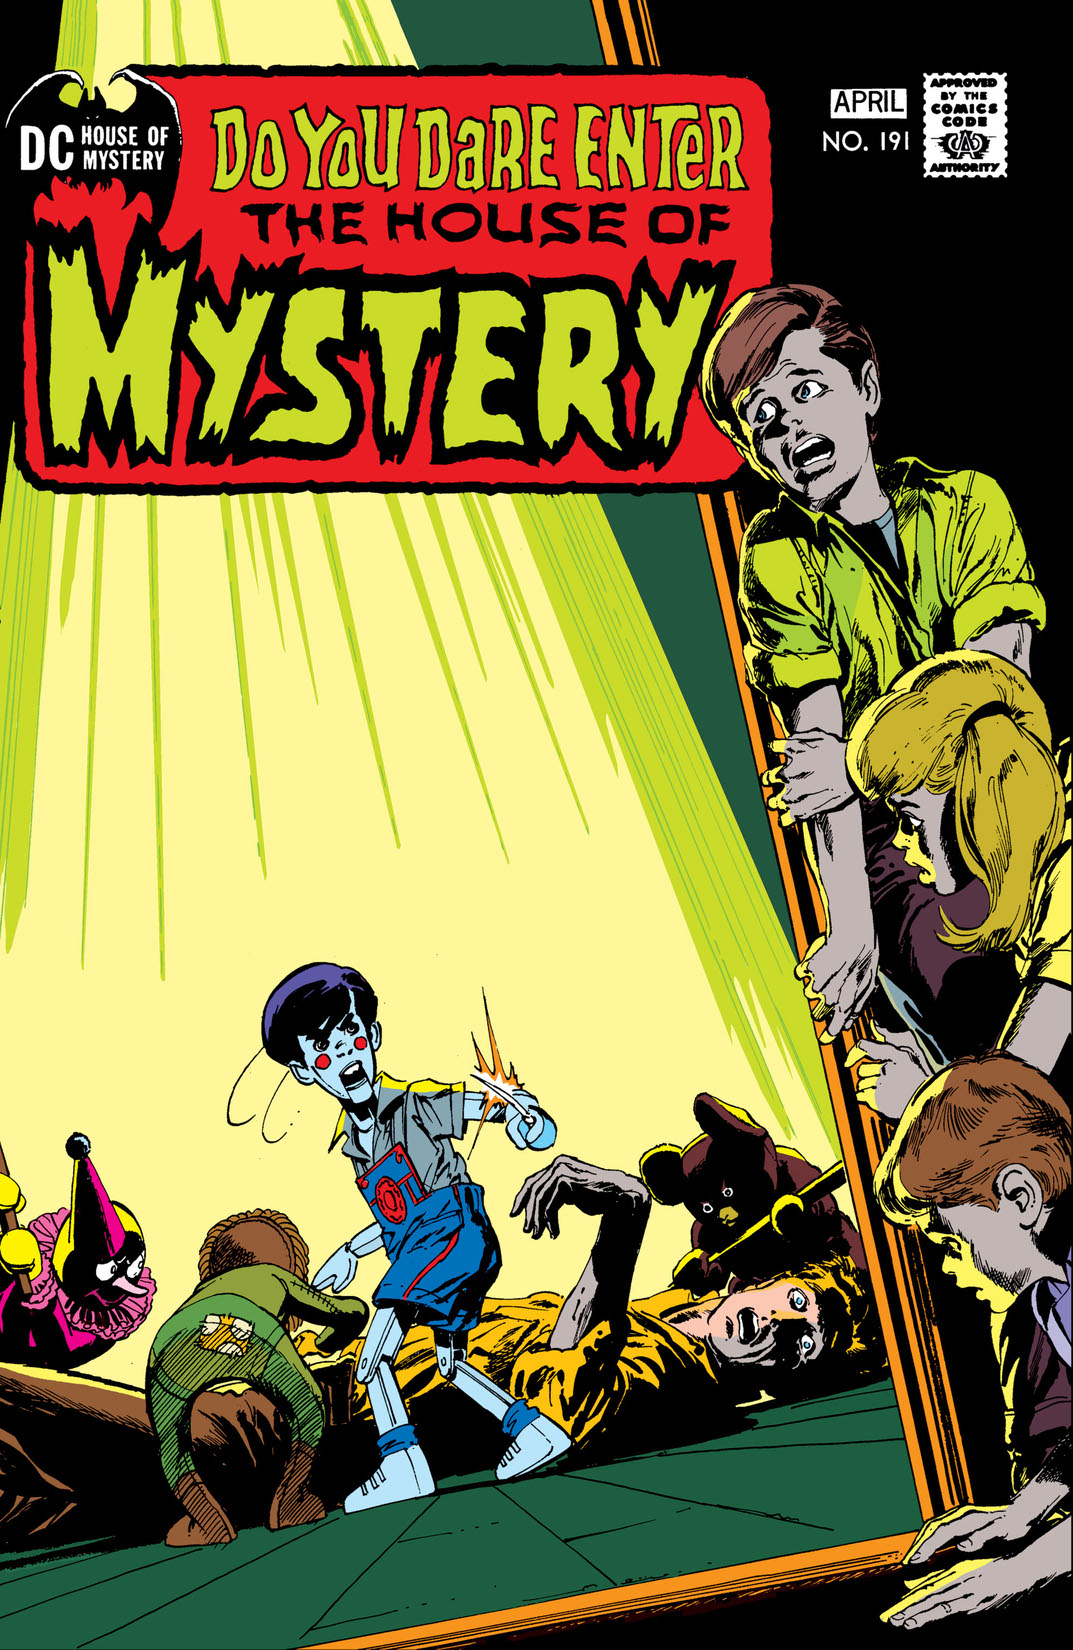 House of Mystery (1951-) #191 preview images